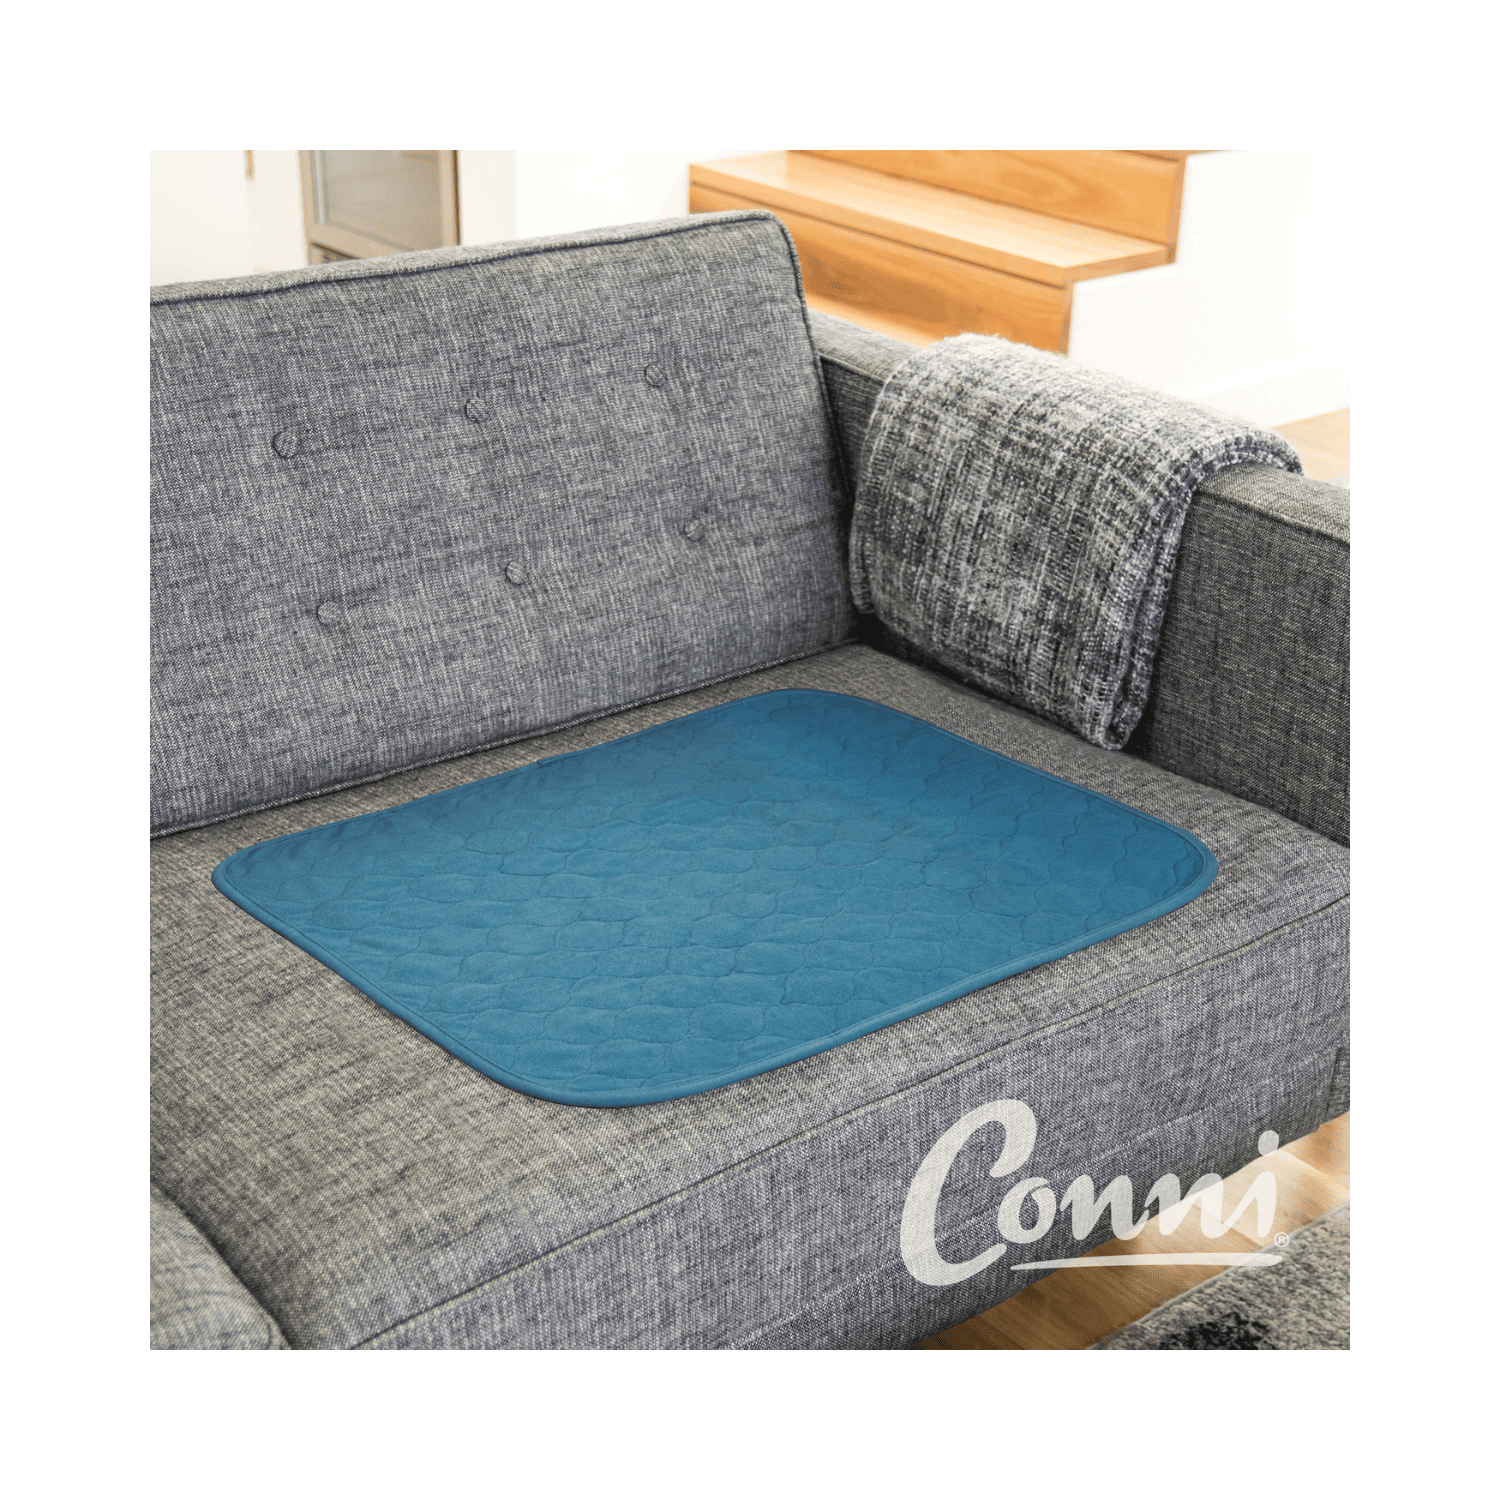 Conni Chair Pad – Teal